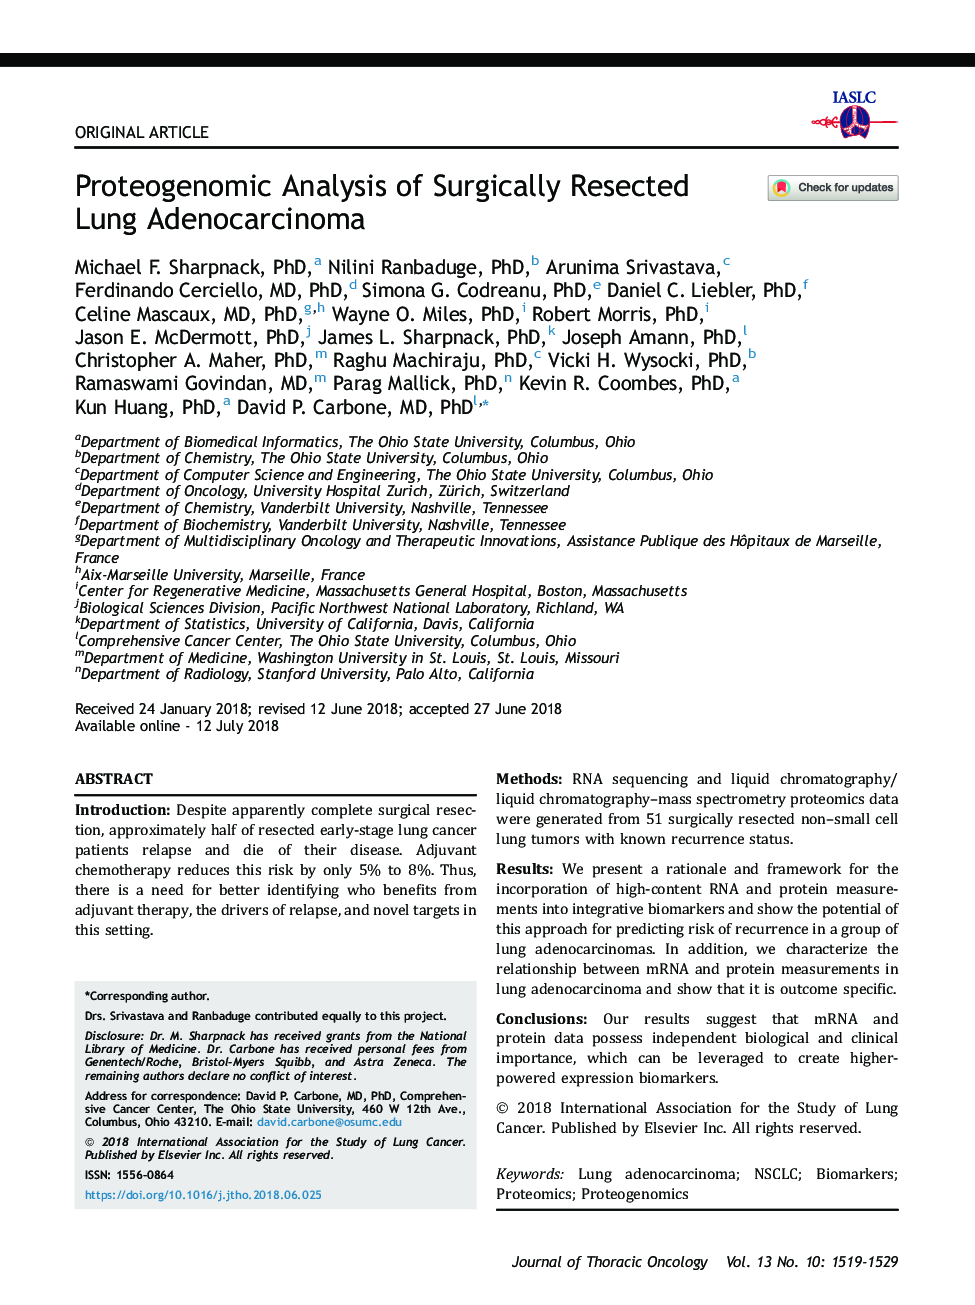 Proteogenomic Analysis of Surgically Resected Lung Adenocarcinoma